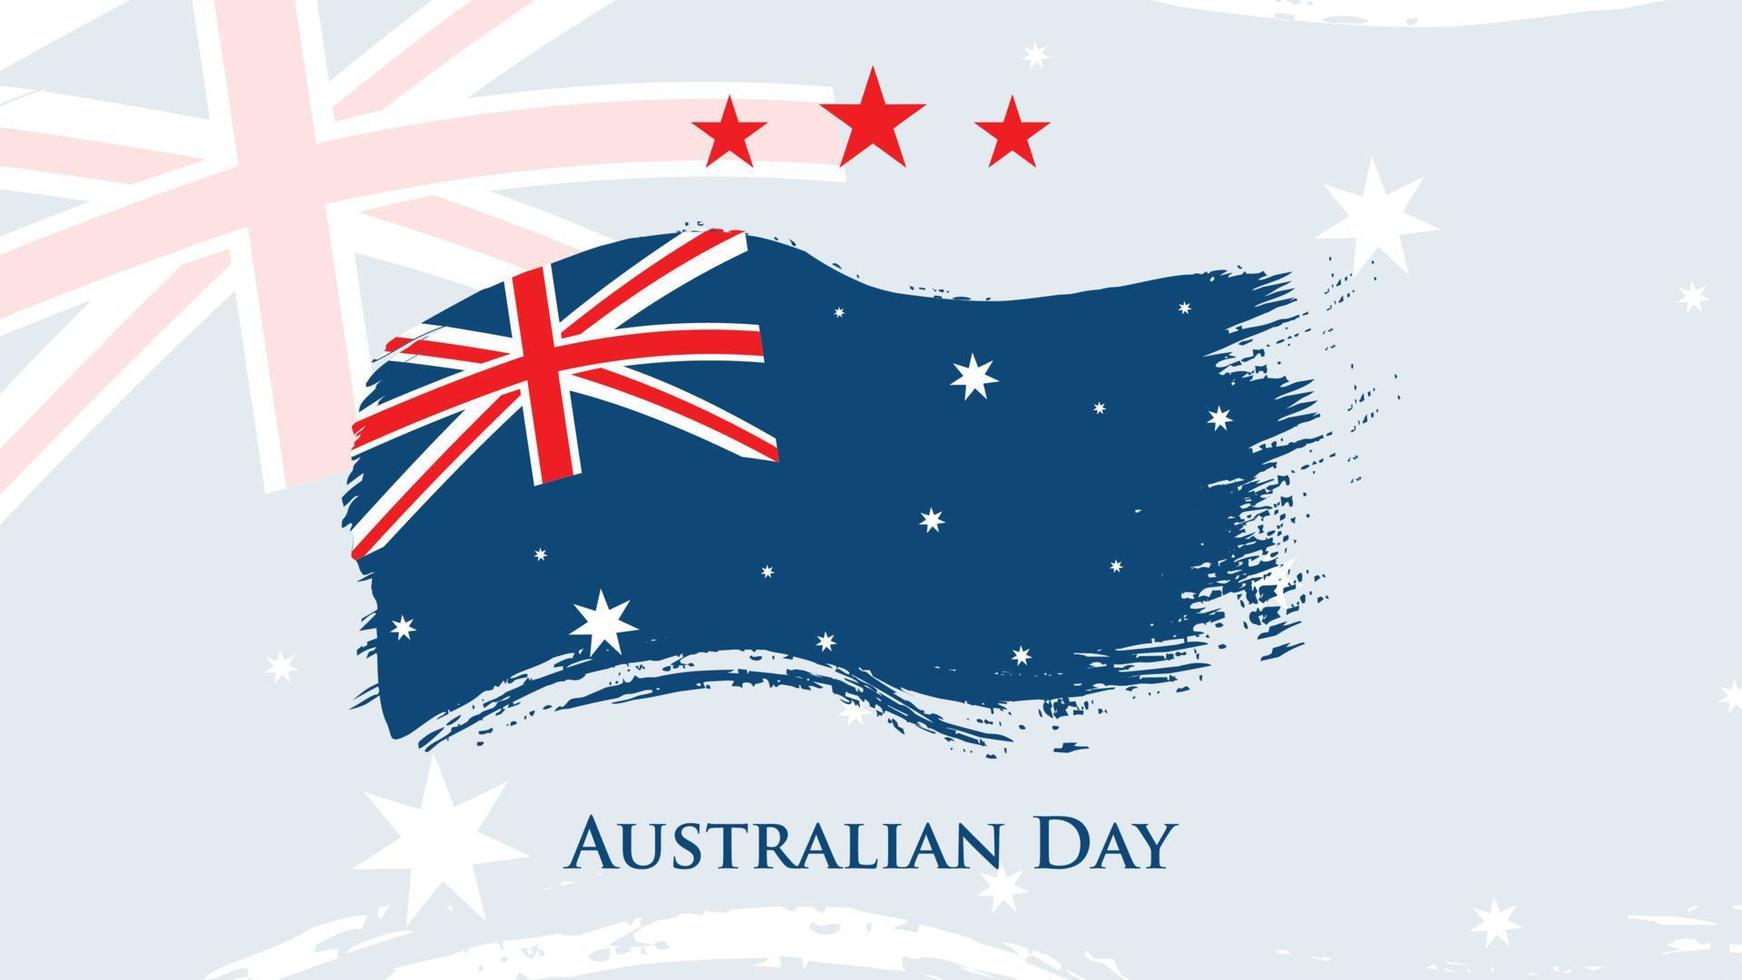 Happy Australia Day - independence day Poster. 26th of January. Australian Day celebration. Memorial Australia day vector design illustration.